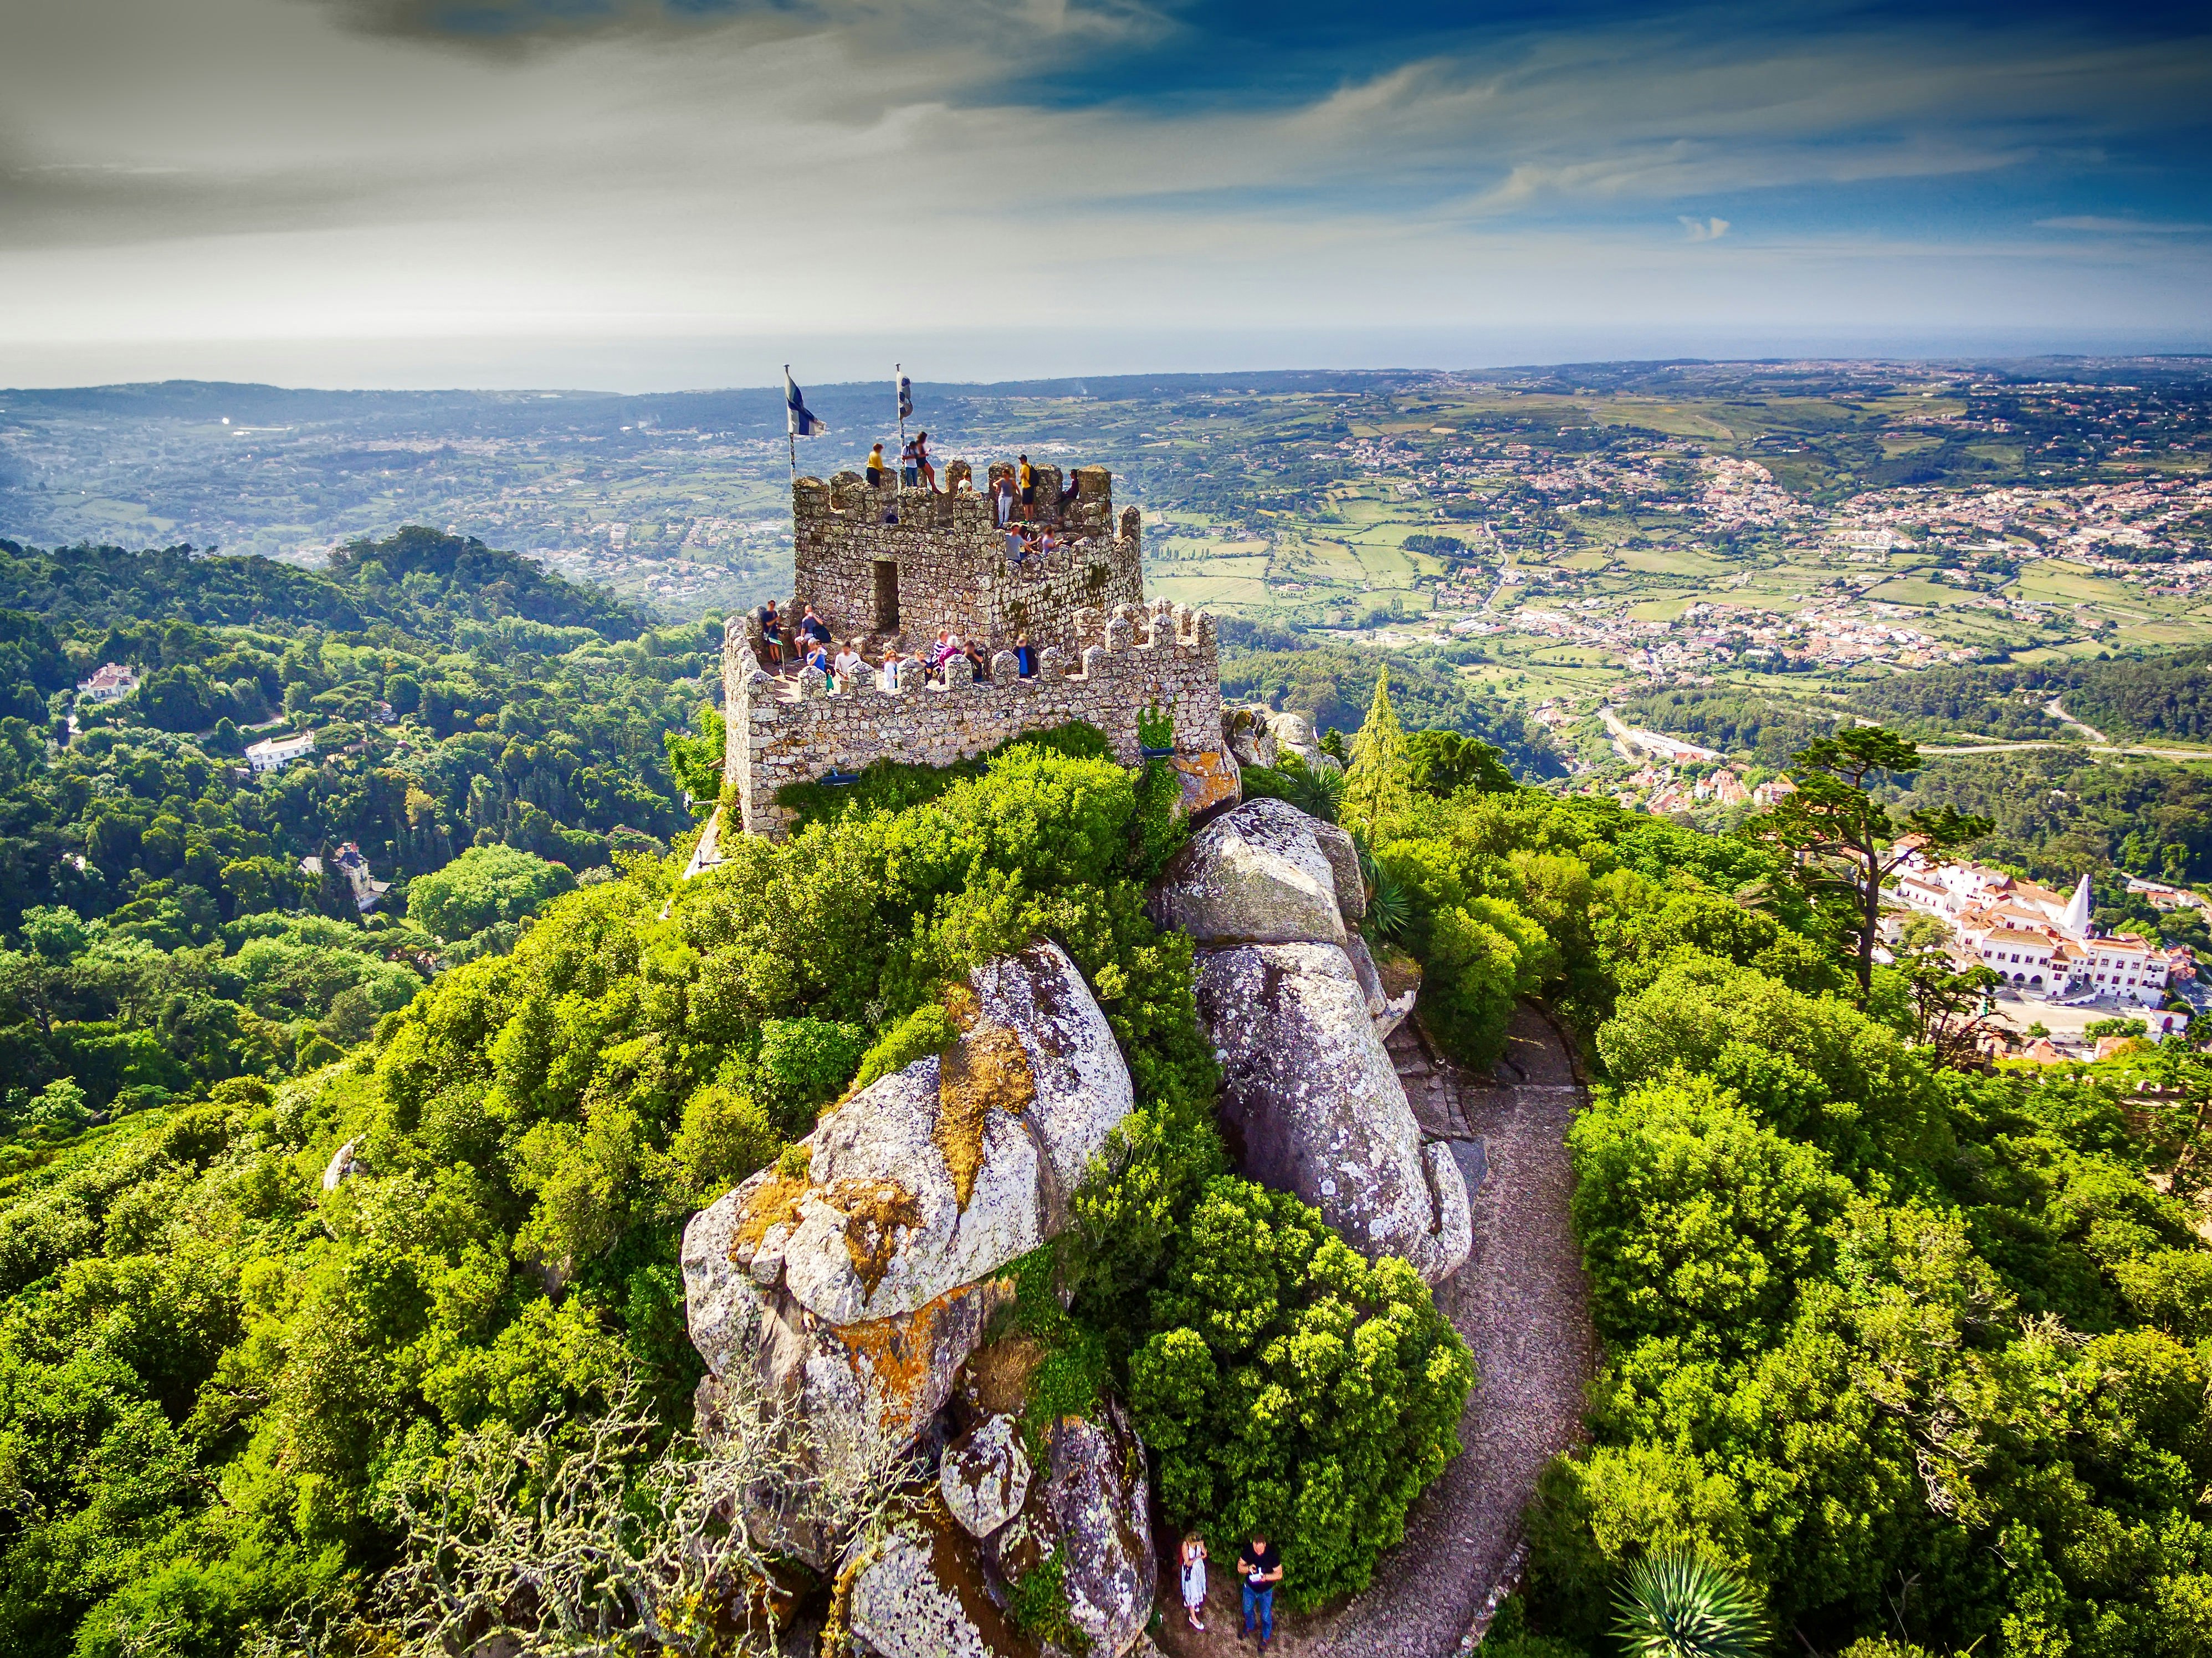 Aerial view of Castelo dos Mouros (Castle of the Moors) in Sintra; the ancient castle sits atop a greenery-covered hillside, and people are standing in the tower, looking out over the valley below.